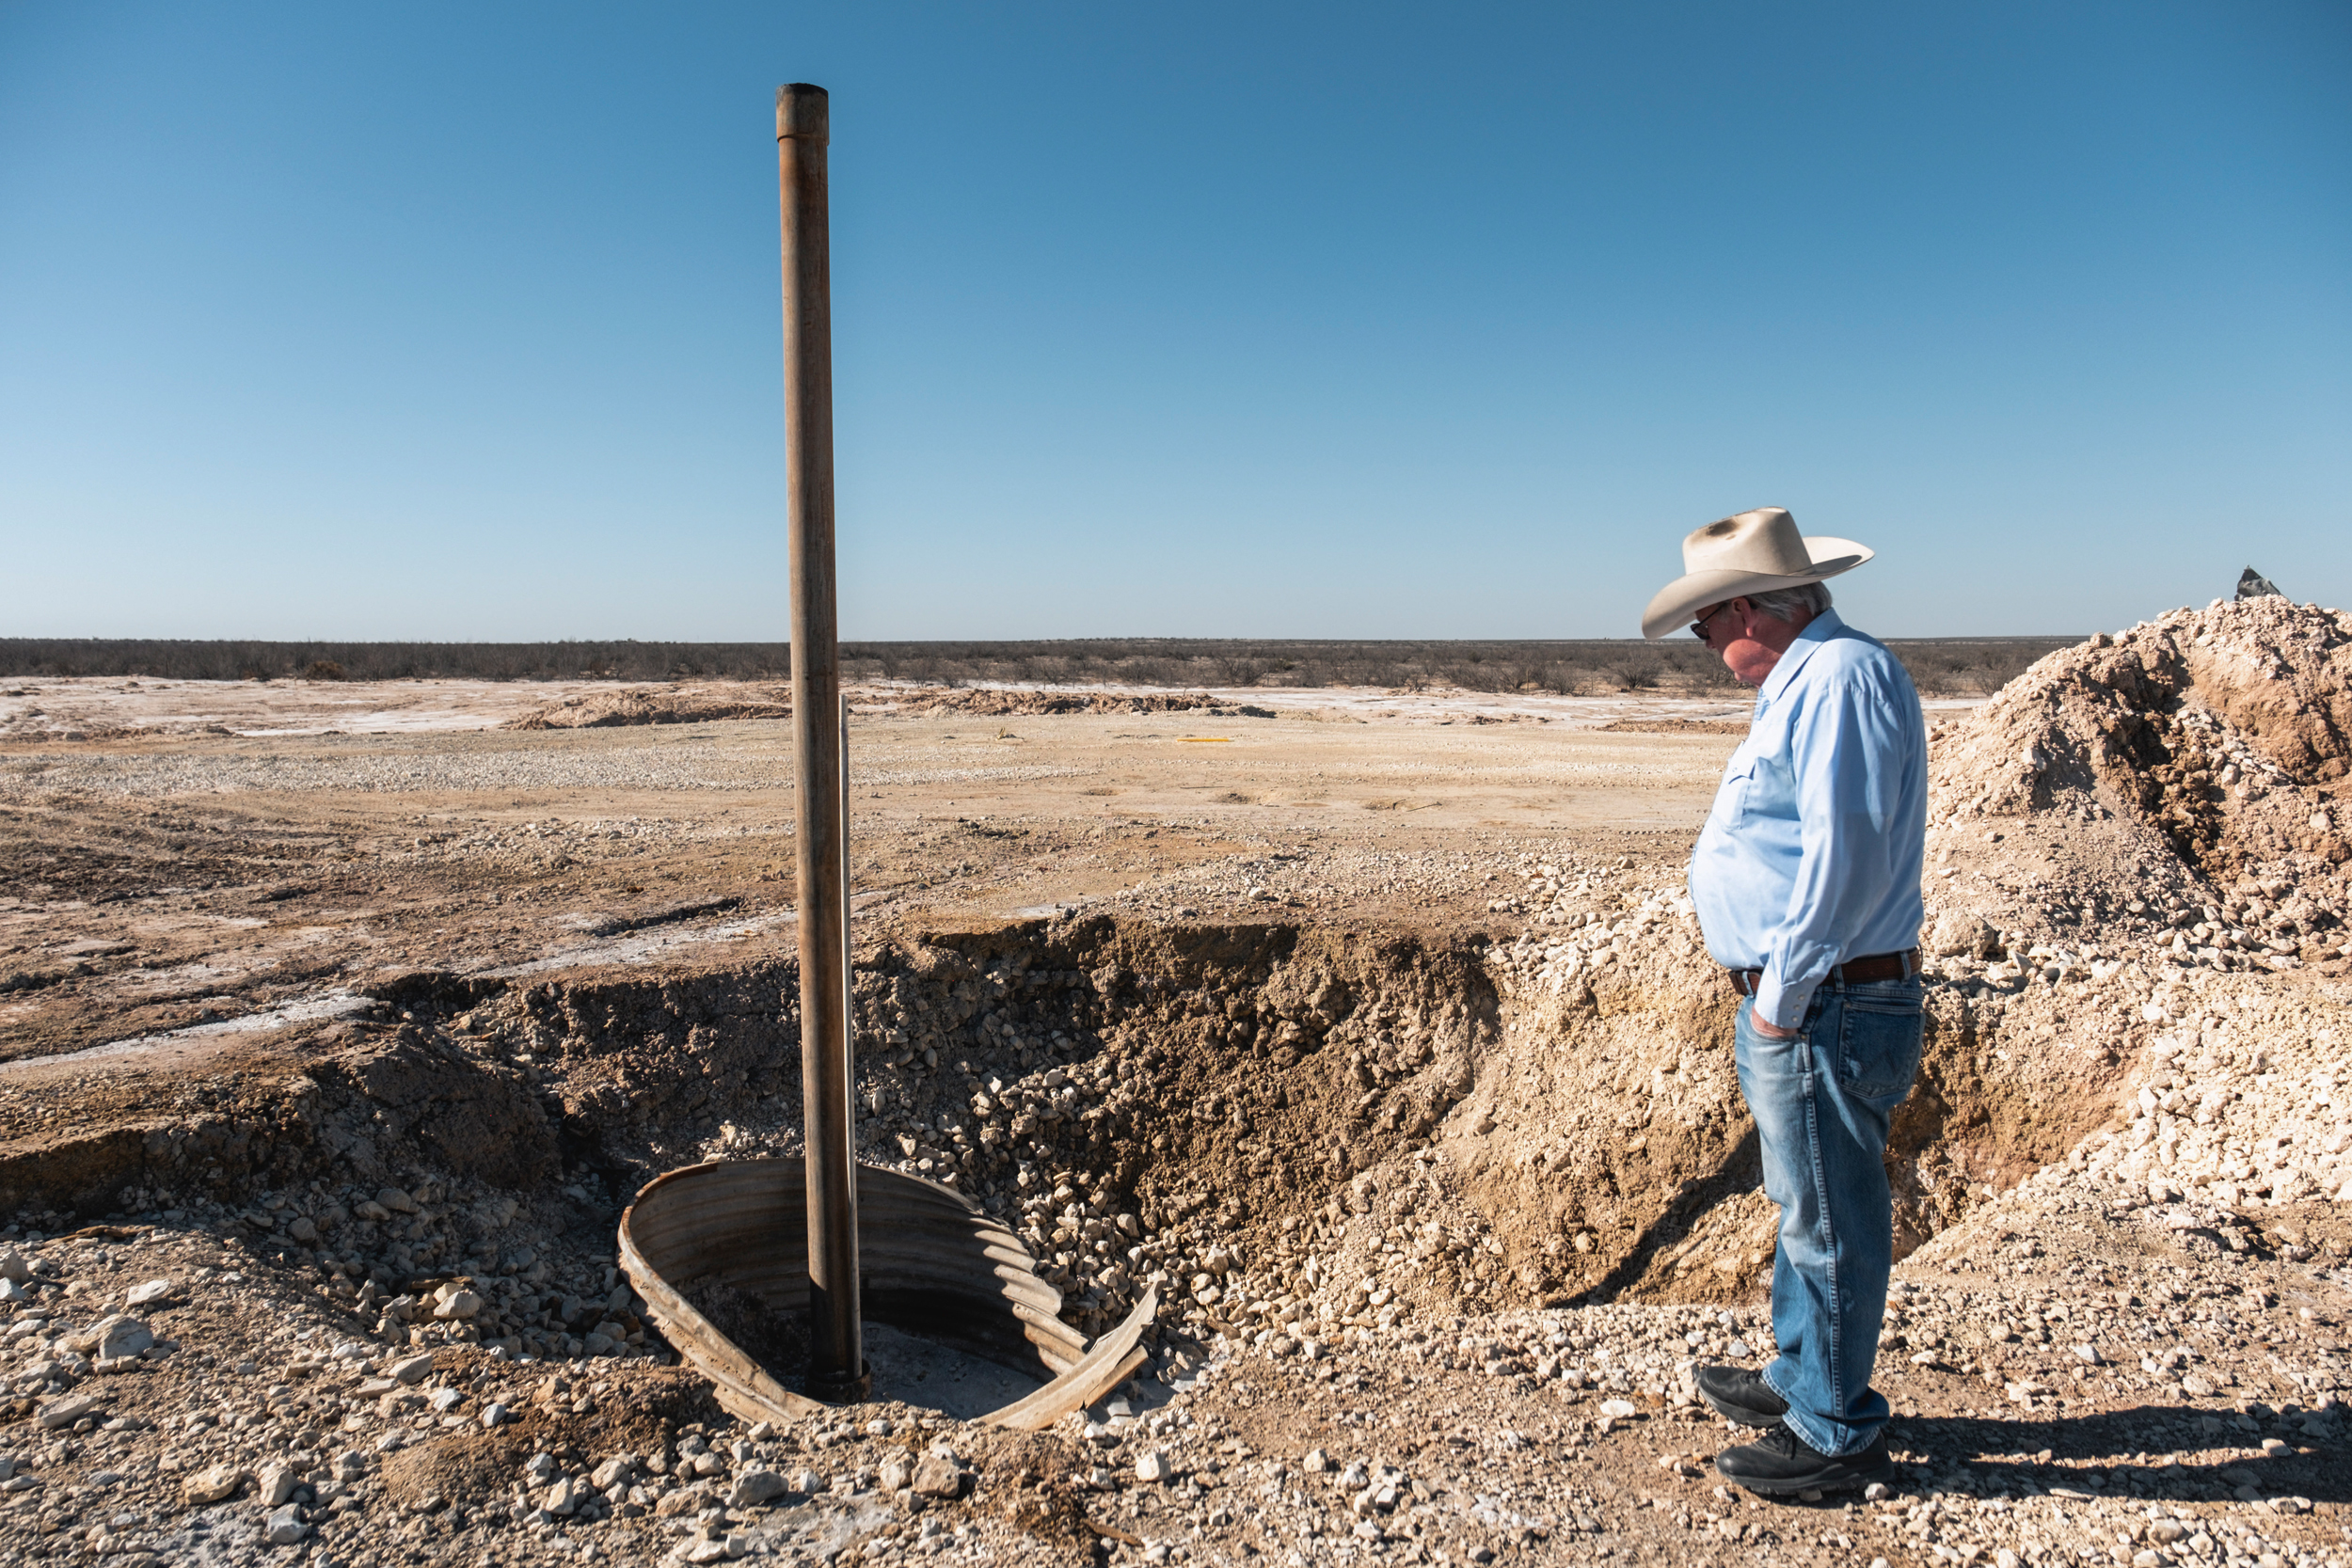 Bill Wight looks at the well that leaked enormous volumes of saltwater on his property. It took crews over a month to seal the well and stop the leak. Credit: Sarah M. Vasquez/The Texas Tribune